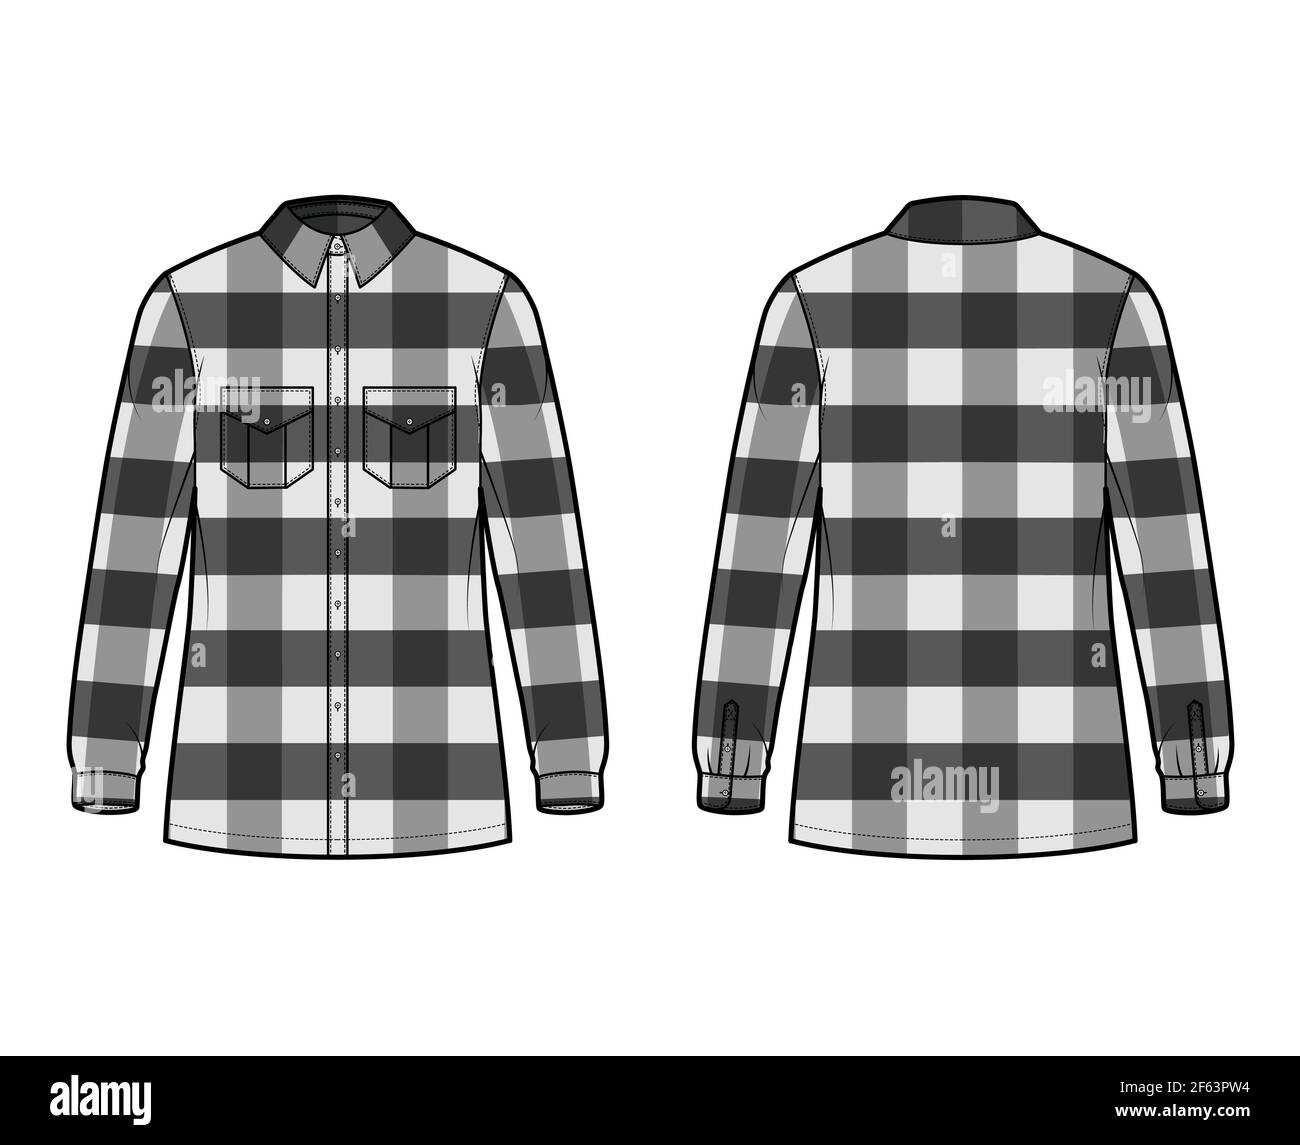 Lumber jacket technical fashion illustration with Buffalo Check motif, flap pockets, button closure, classic collar, long sleeves. Flat apparel front, back, grey color style. Women, unisex CAD mockup Stock Vector